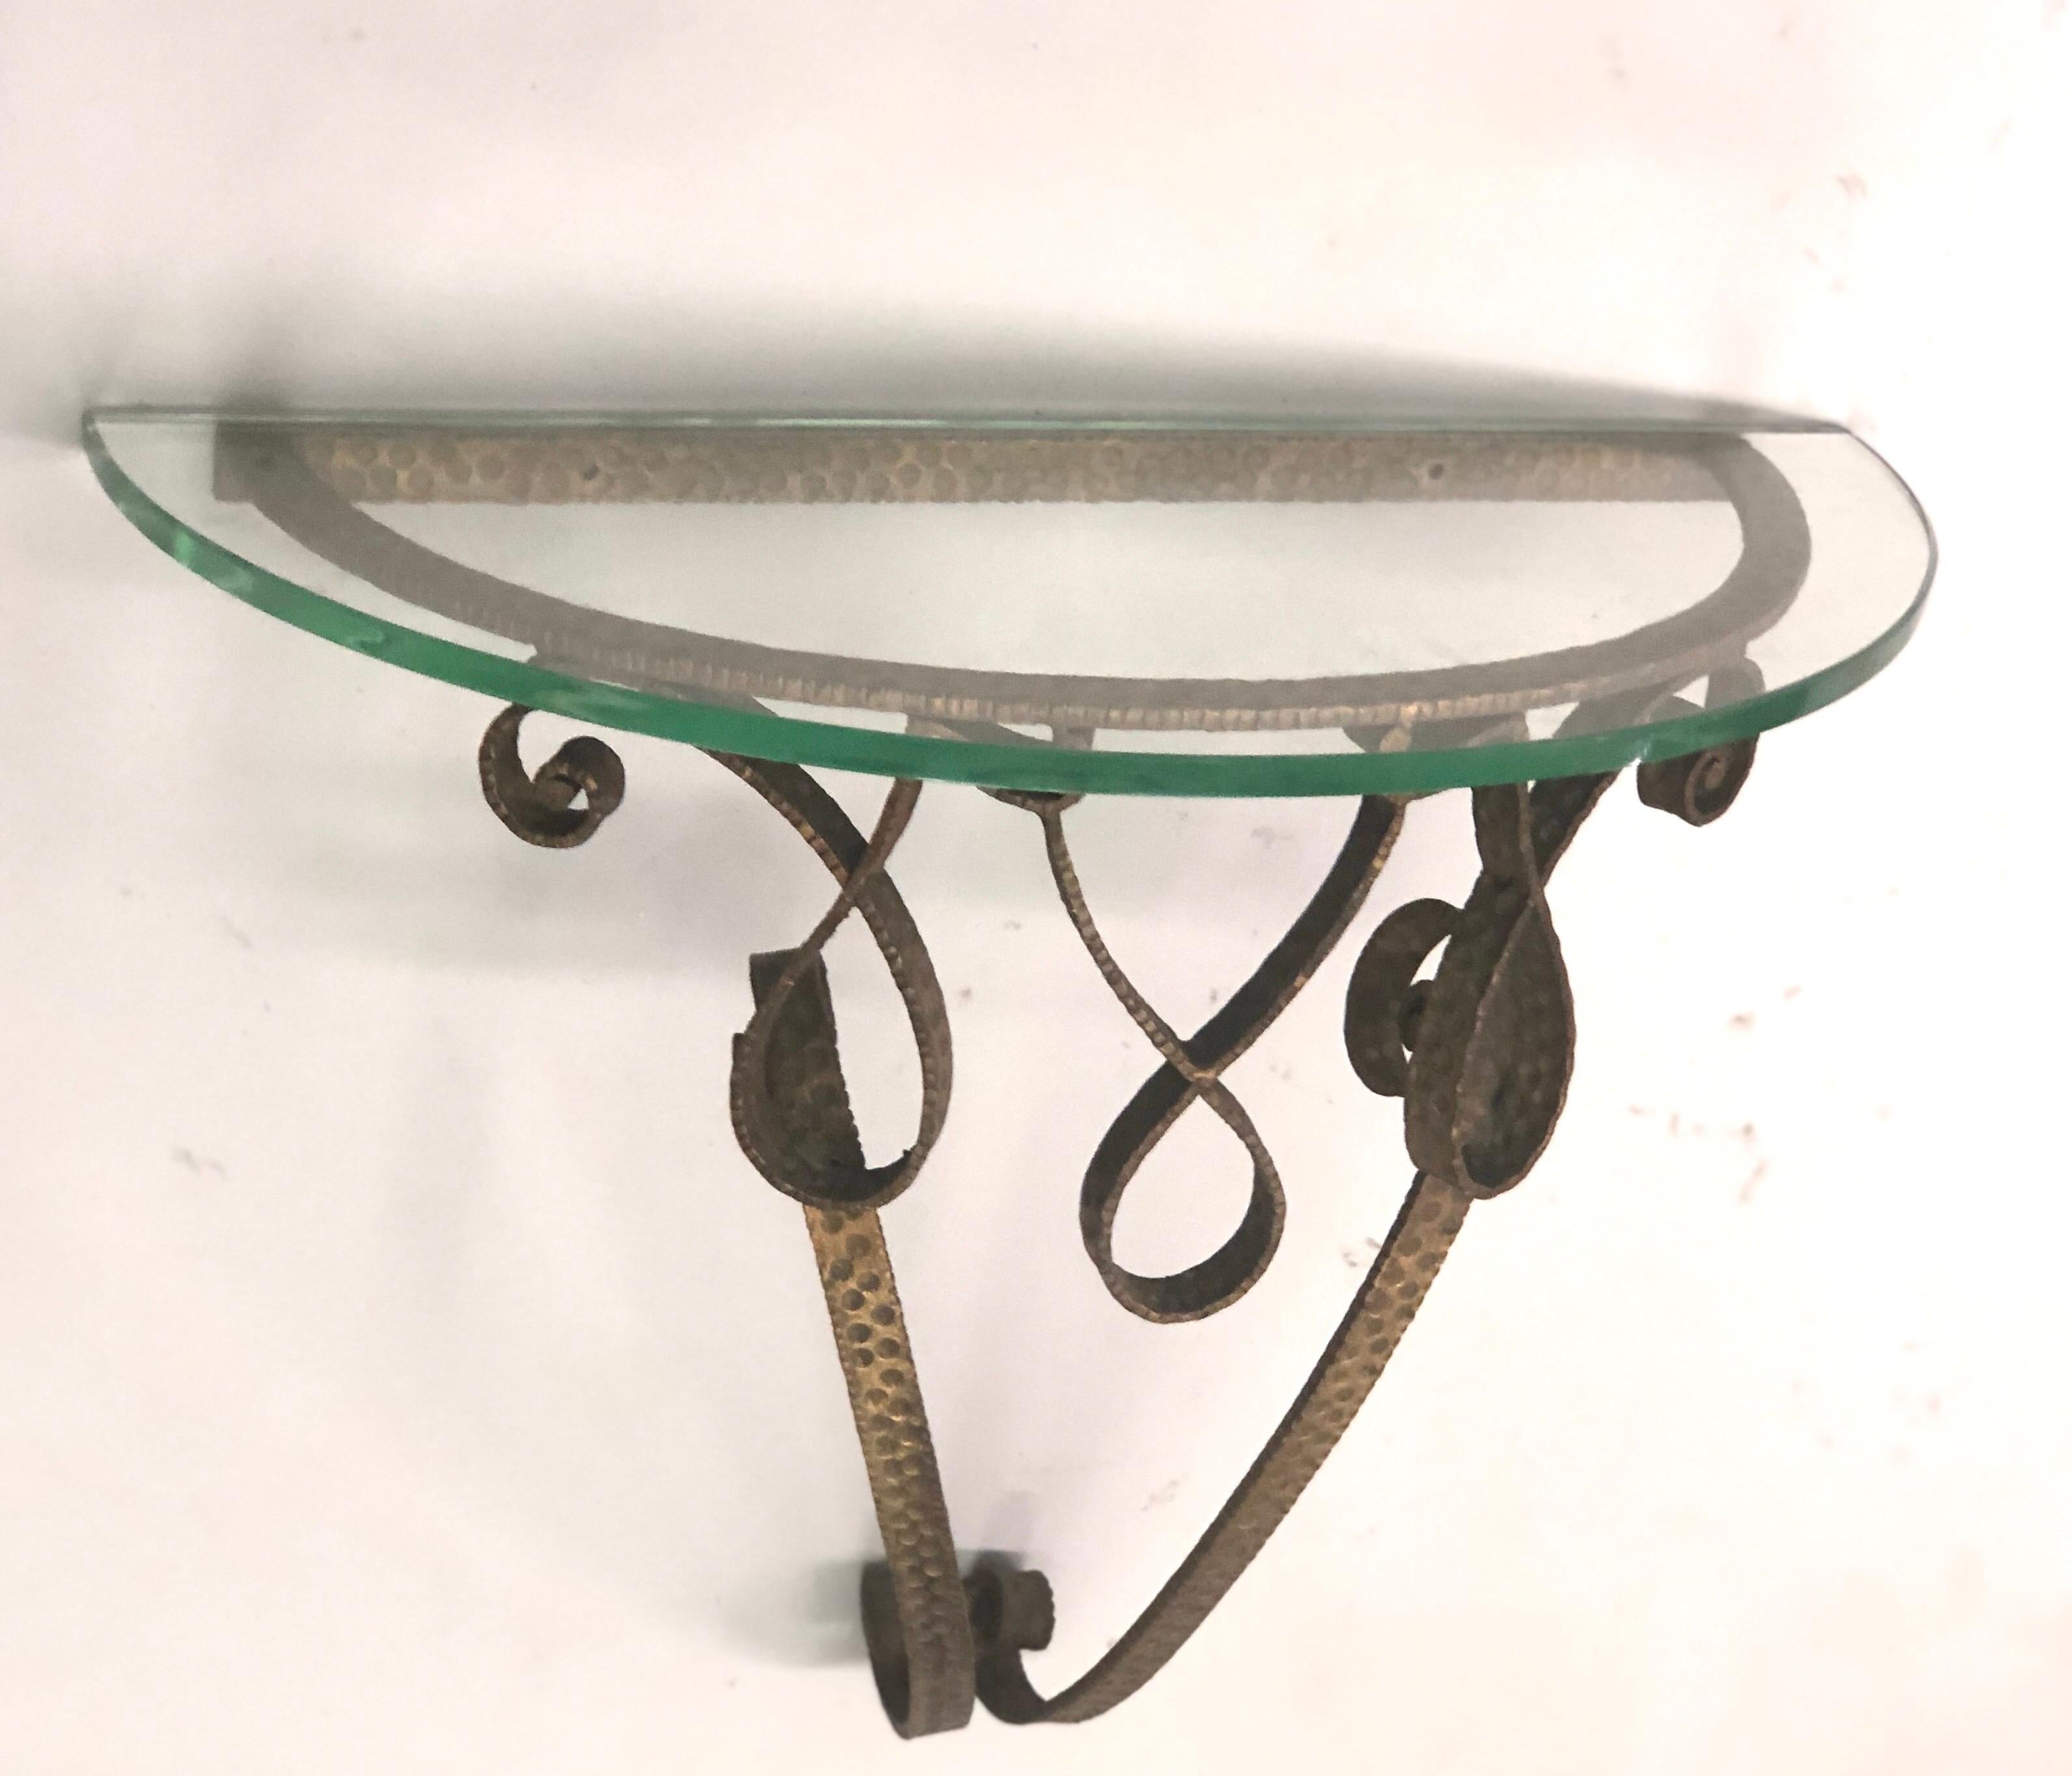 Italian Midcentury Gilt Wrought Iron Demilune Wall Console by Pierluigi Colli In Good Condition For Sale In New York, NY